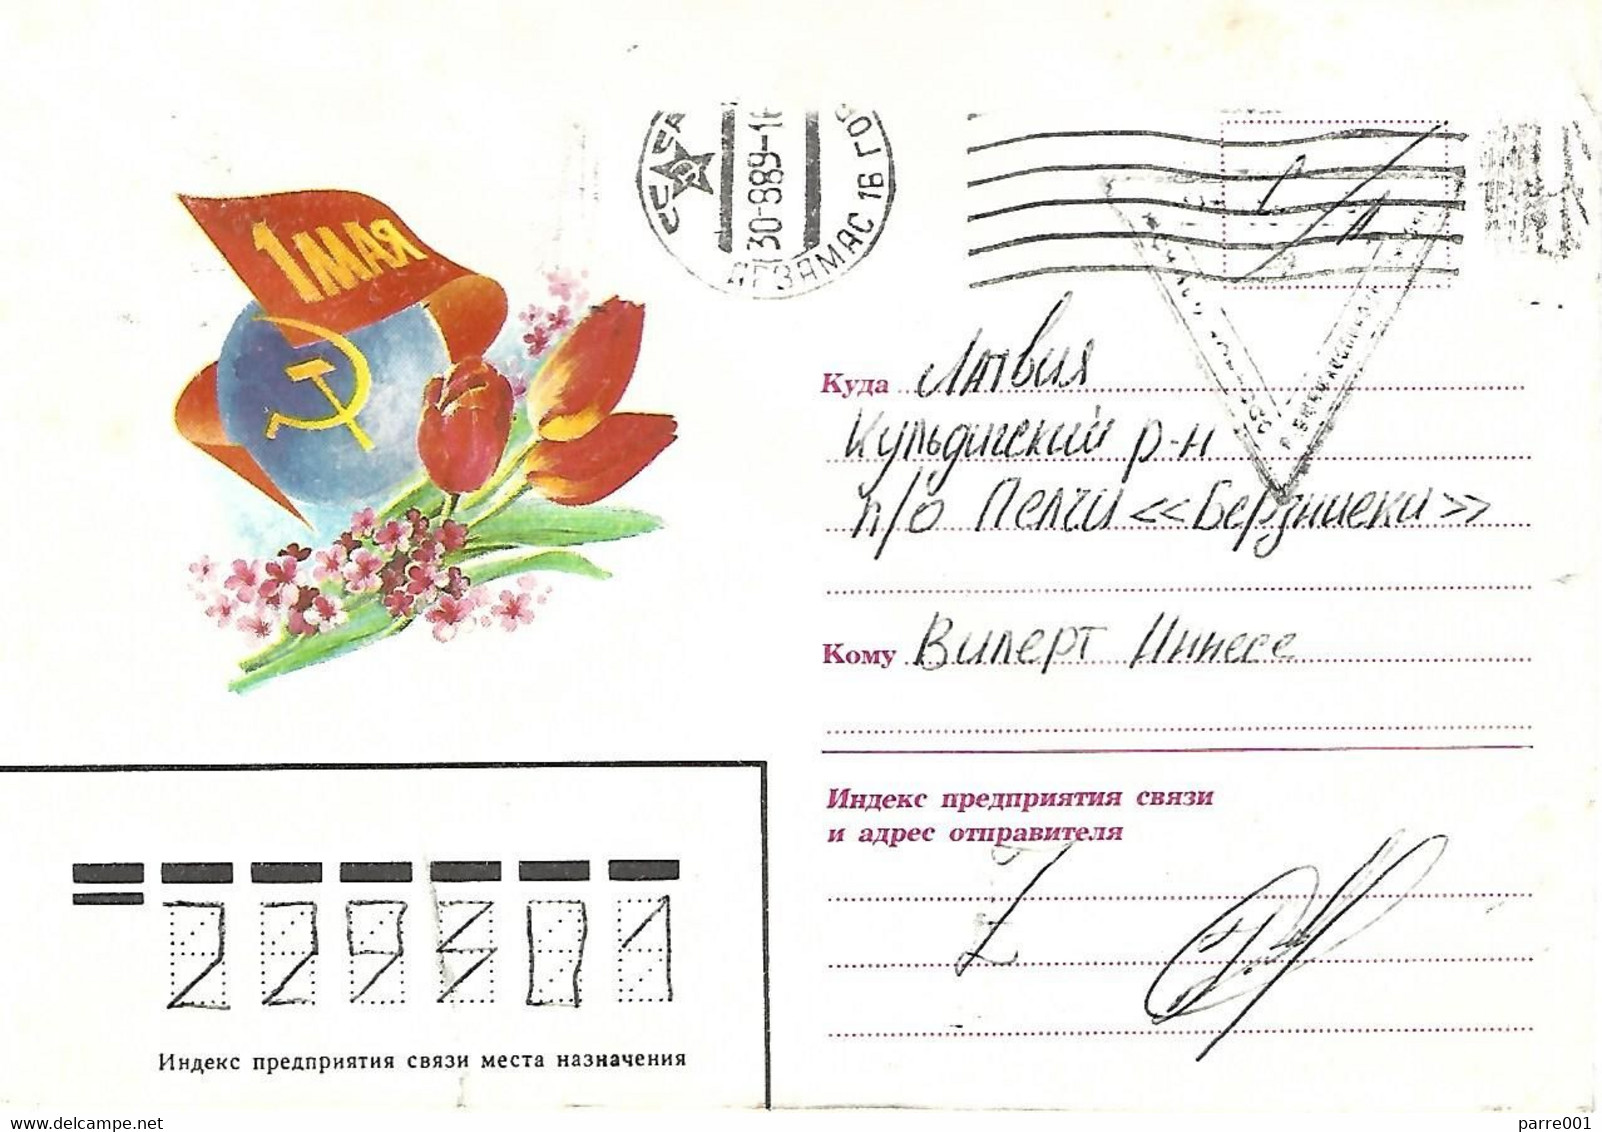 Russia 1989 Arzamas Novgorod Oblast Unfranked Soldier's Letter/Free/Express Service Handstamp Cover To Pelchi Latvia - Militaria